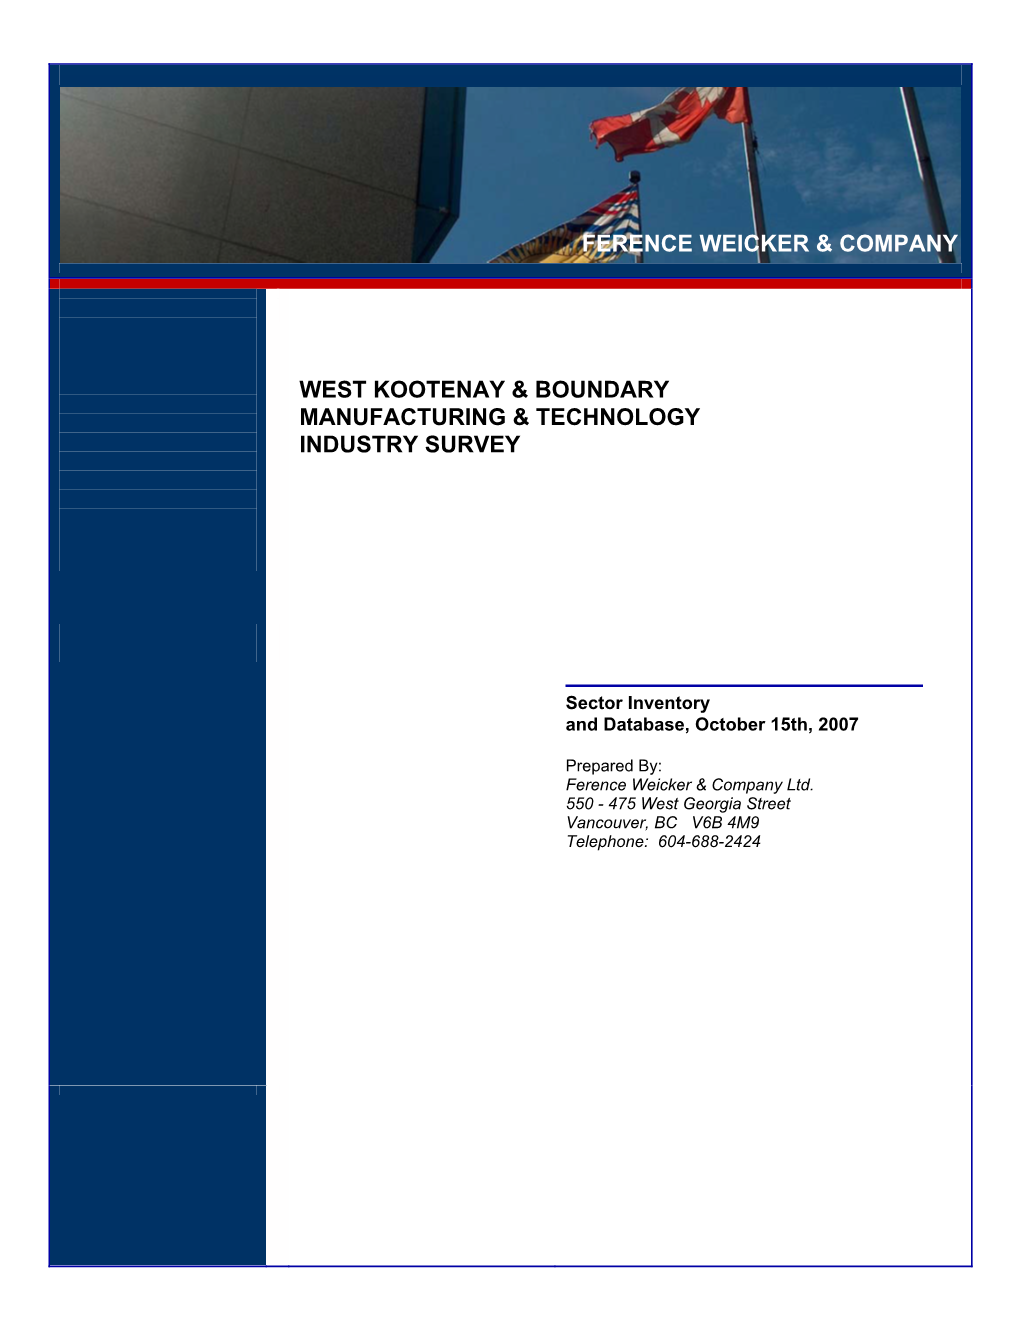 West Kootenay & Boundary Manufacturing & Technology Industry Survey Ference Weicker & Company